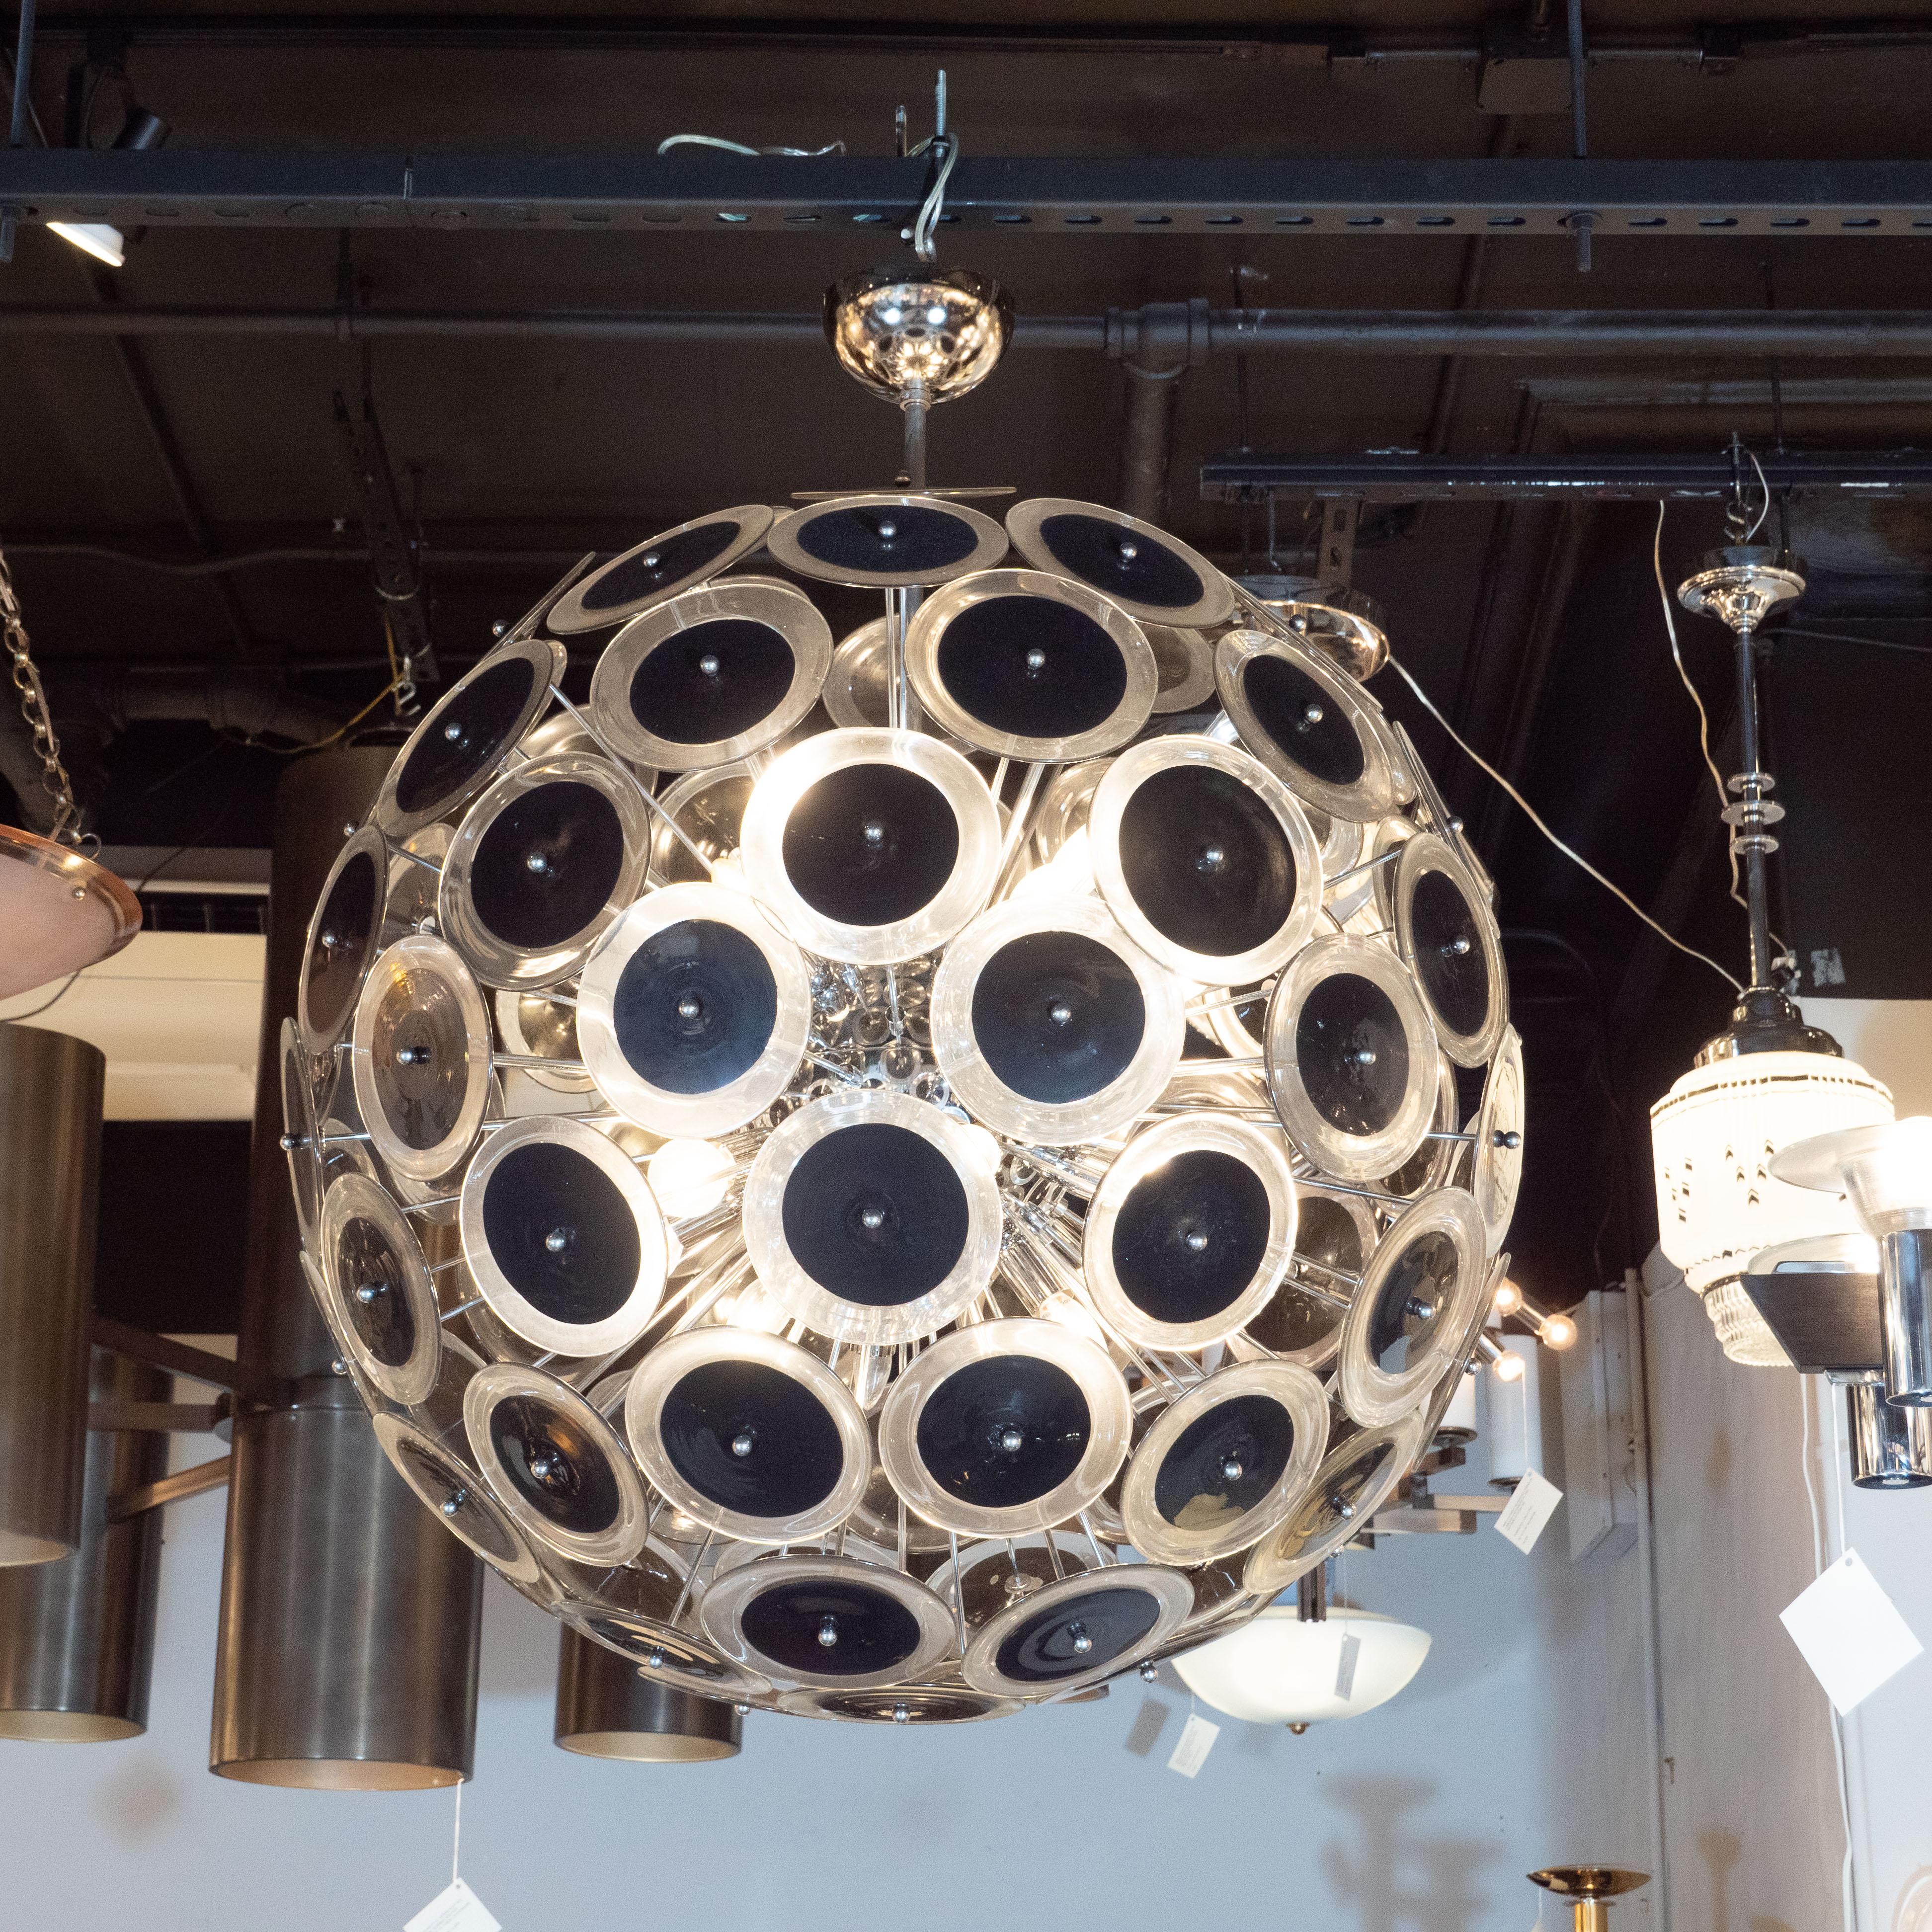 This dramatic and graphic Vistosi sputnik chandelier was hand blown in Murano, Italy, the islands off the coast of Venice renowned for centuries for their superlative glass production. It features a wealth of polished chrome emanating from circular